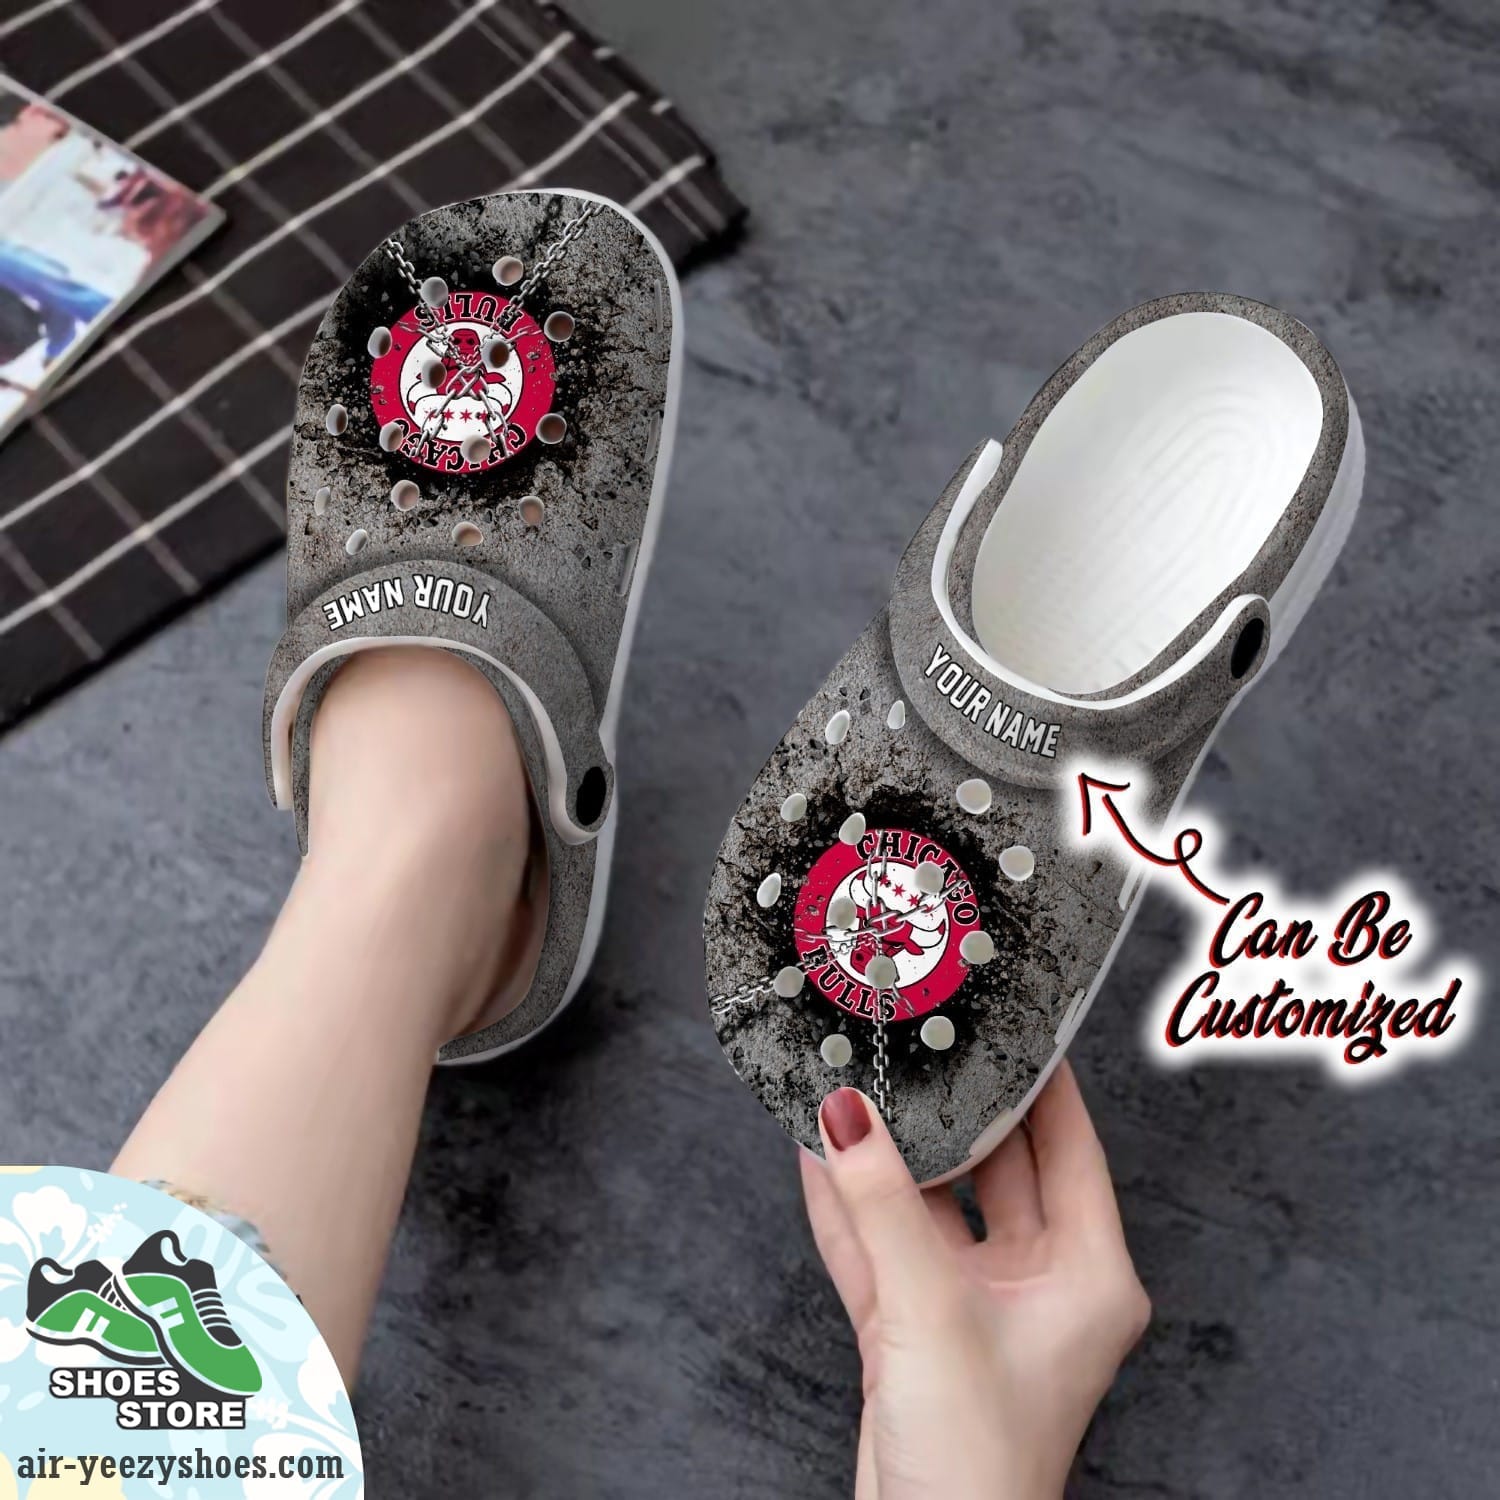 Chicago Bulls Personalized Chain Breaking Wall Clog Shoes, Basketball Crocs